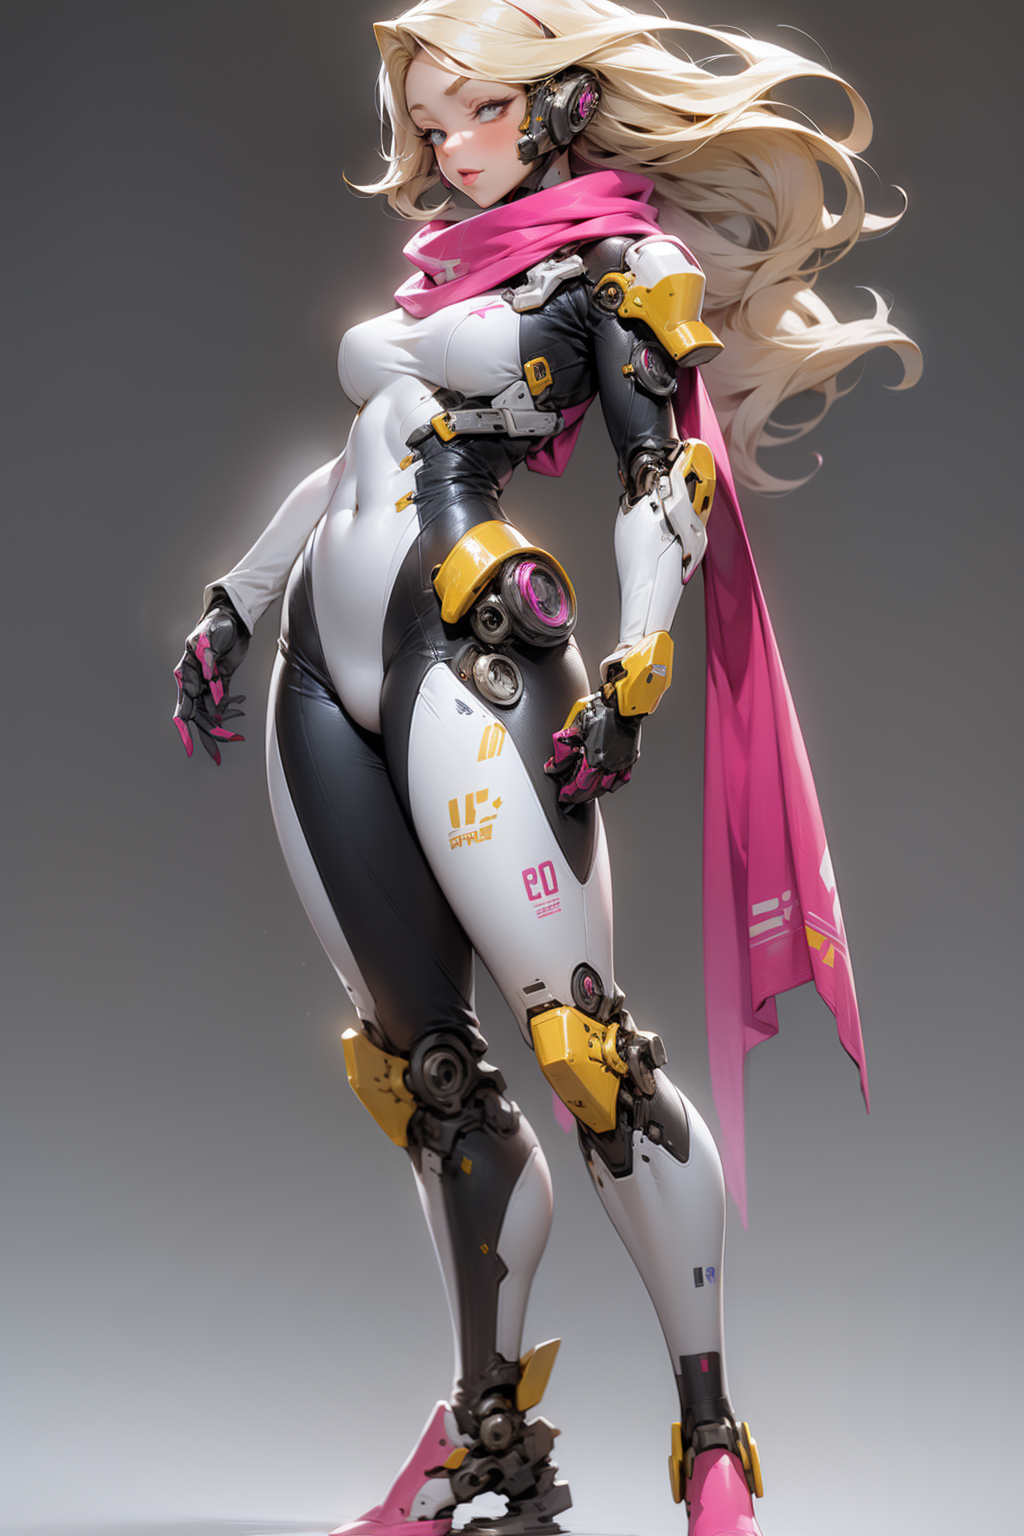 A Pink Scarf-Wearing Female Robot in White and Gray Uniform.